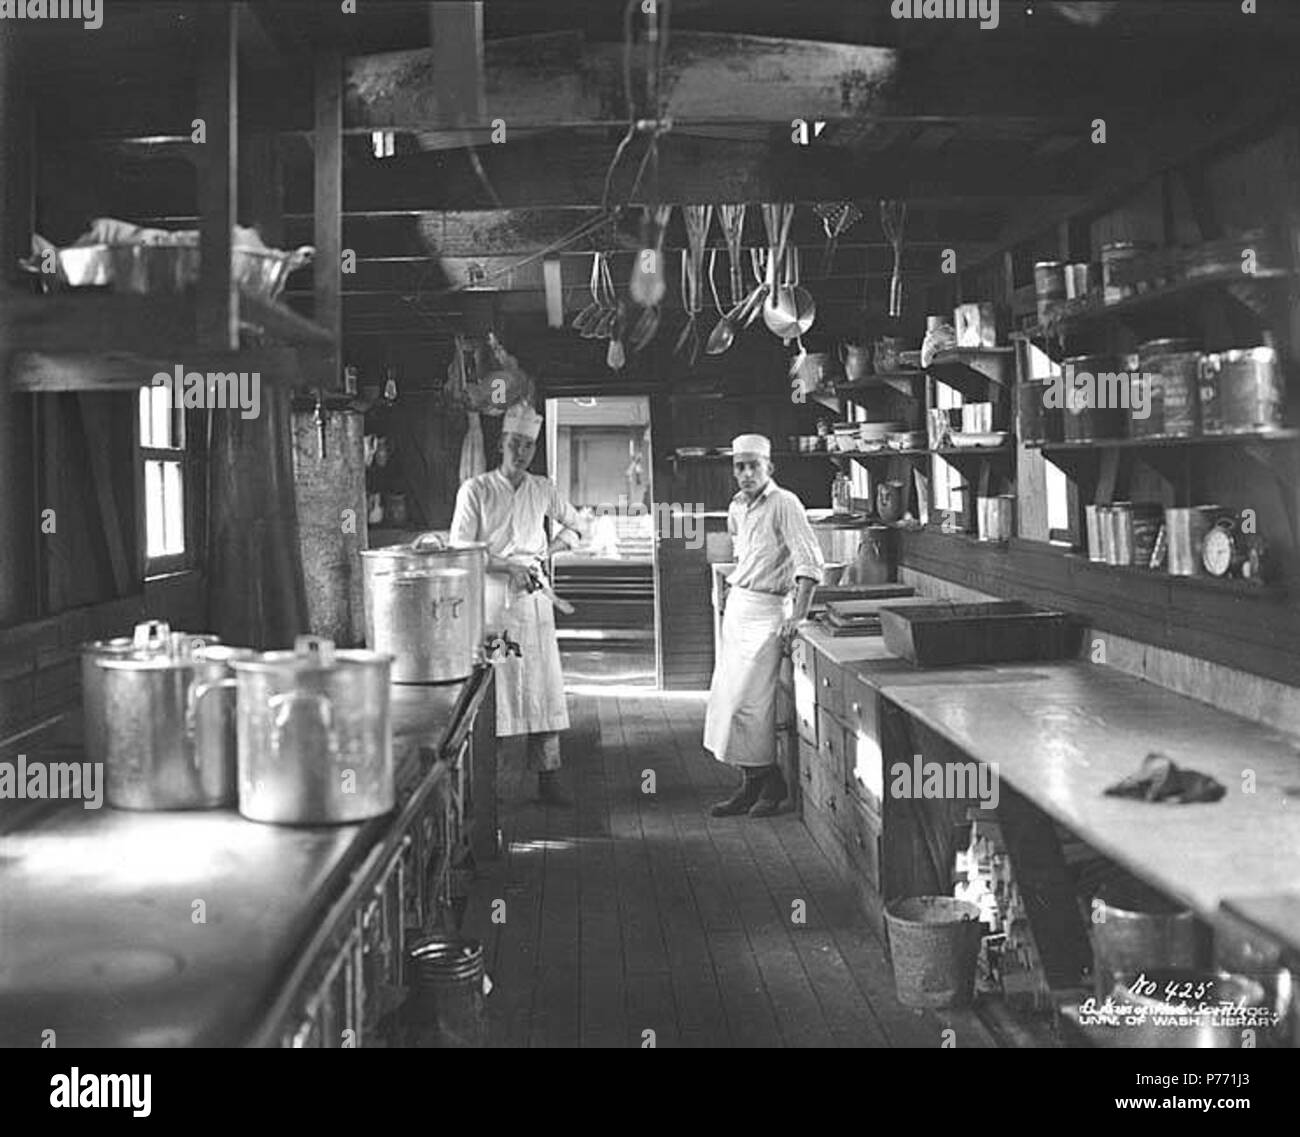 . English: Camp galley interior and cooks, Cascade Timber Company, ca. 1927 . English: PH Coll 516.317 Subjects (LCTGM): Cooks; Kitchens--Washington (State); Lumber camps--Washington (State); Interiors--Washington (State); Lumber industry--Washington (State); Cascade Timber Company--People--Washington (State); Cascade Timber Company--Facilities--Washington (State); Pierce County  . circa 1927 1 Camp galley interior and cooks, Cascade Timber Company, ca 1927 (KINSEY 12) Stock Photo